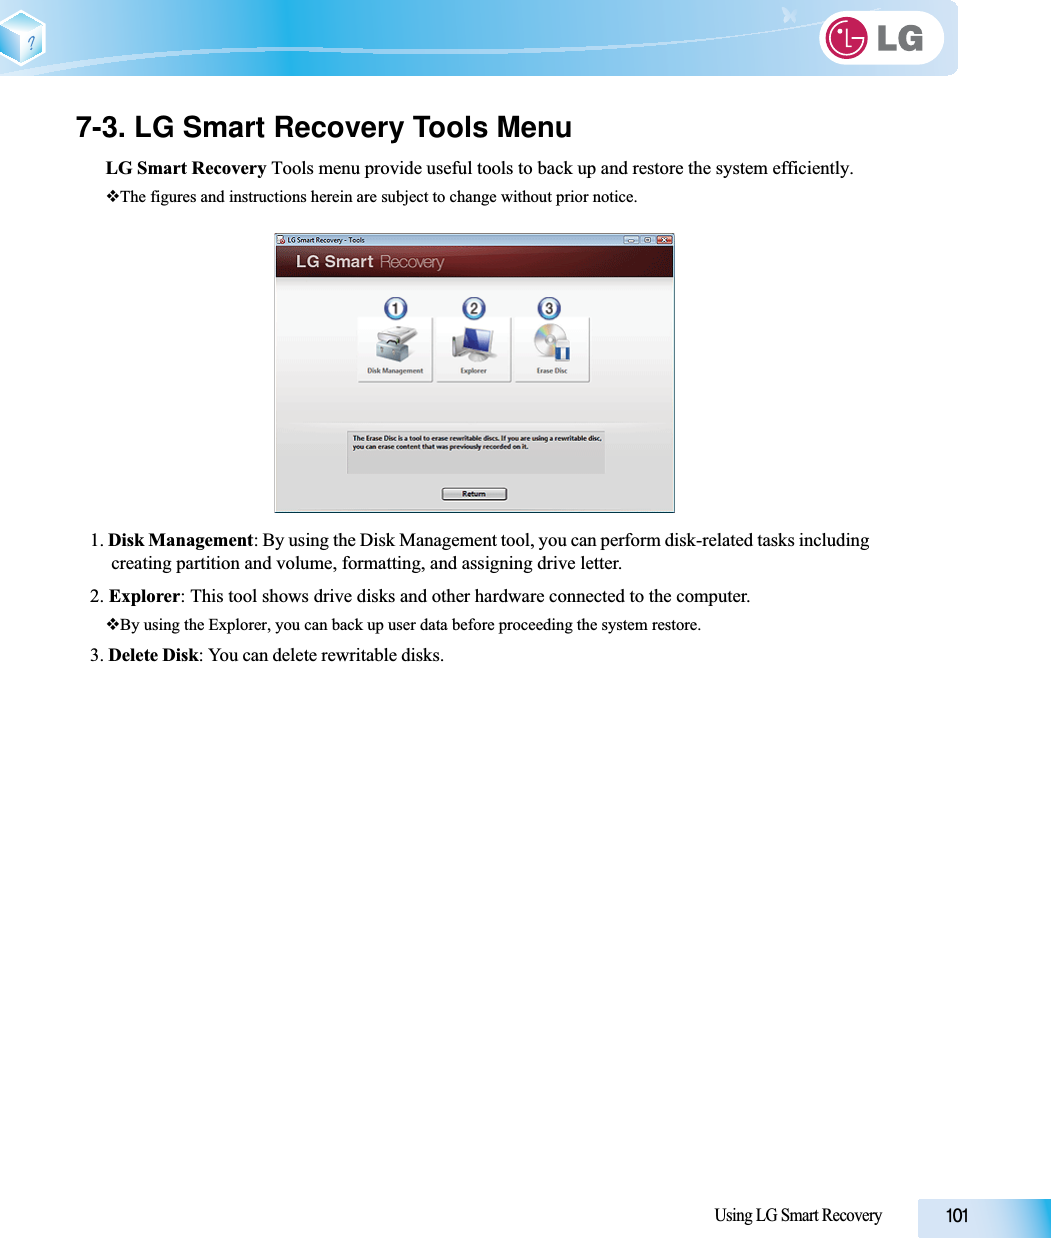 Using LG Smart Recovery7-3. LG Smart Recovery Tools MenuLG Smart Recovery Tools menu provide useful tools to back up and restore the system efficiently.The figures and instructions herein are subject to change without prior notice.1. Disk Management: By using the Disk Management tool, you can perform disk-related tasks including creating partition and volume, formatting, and assigning drive letter.2. Explorer: This tool shows drive disks and other hardware connected to the computer.By using the Explorer, you can back up user data before proceeding the system restore.3. Delete Disk: You can delete rewritable disks. 